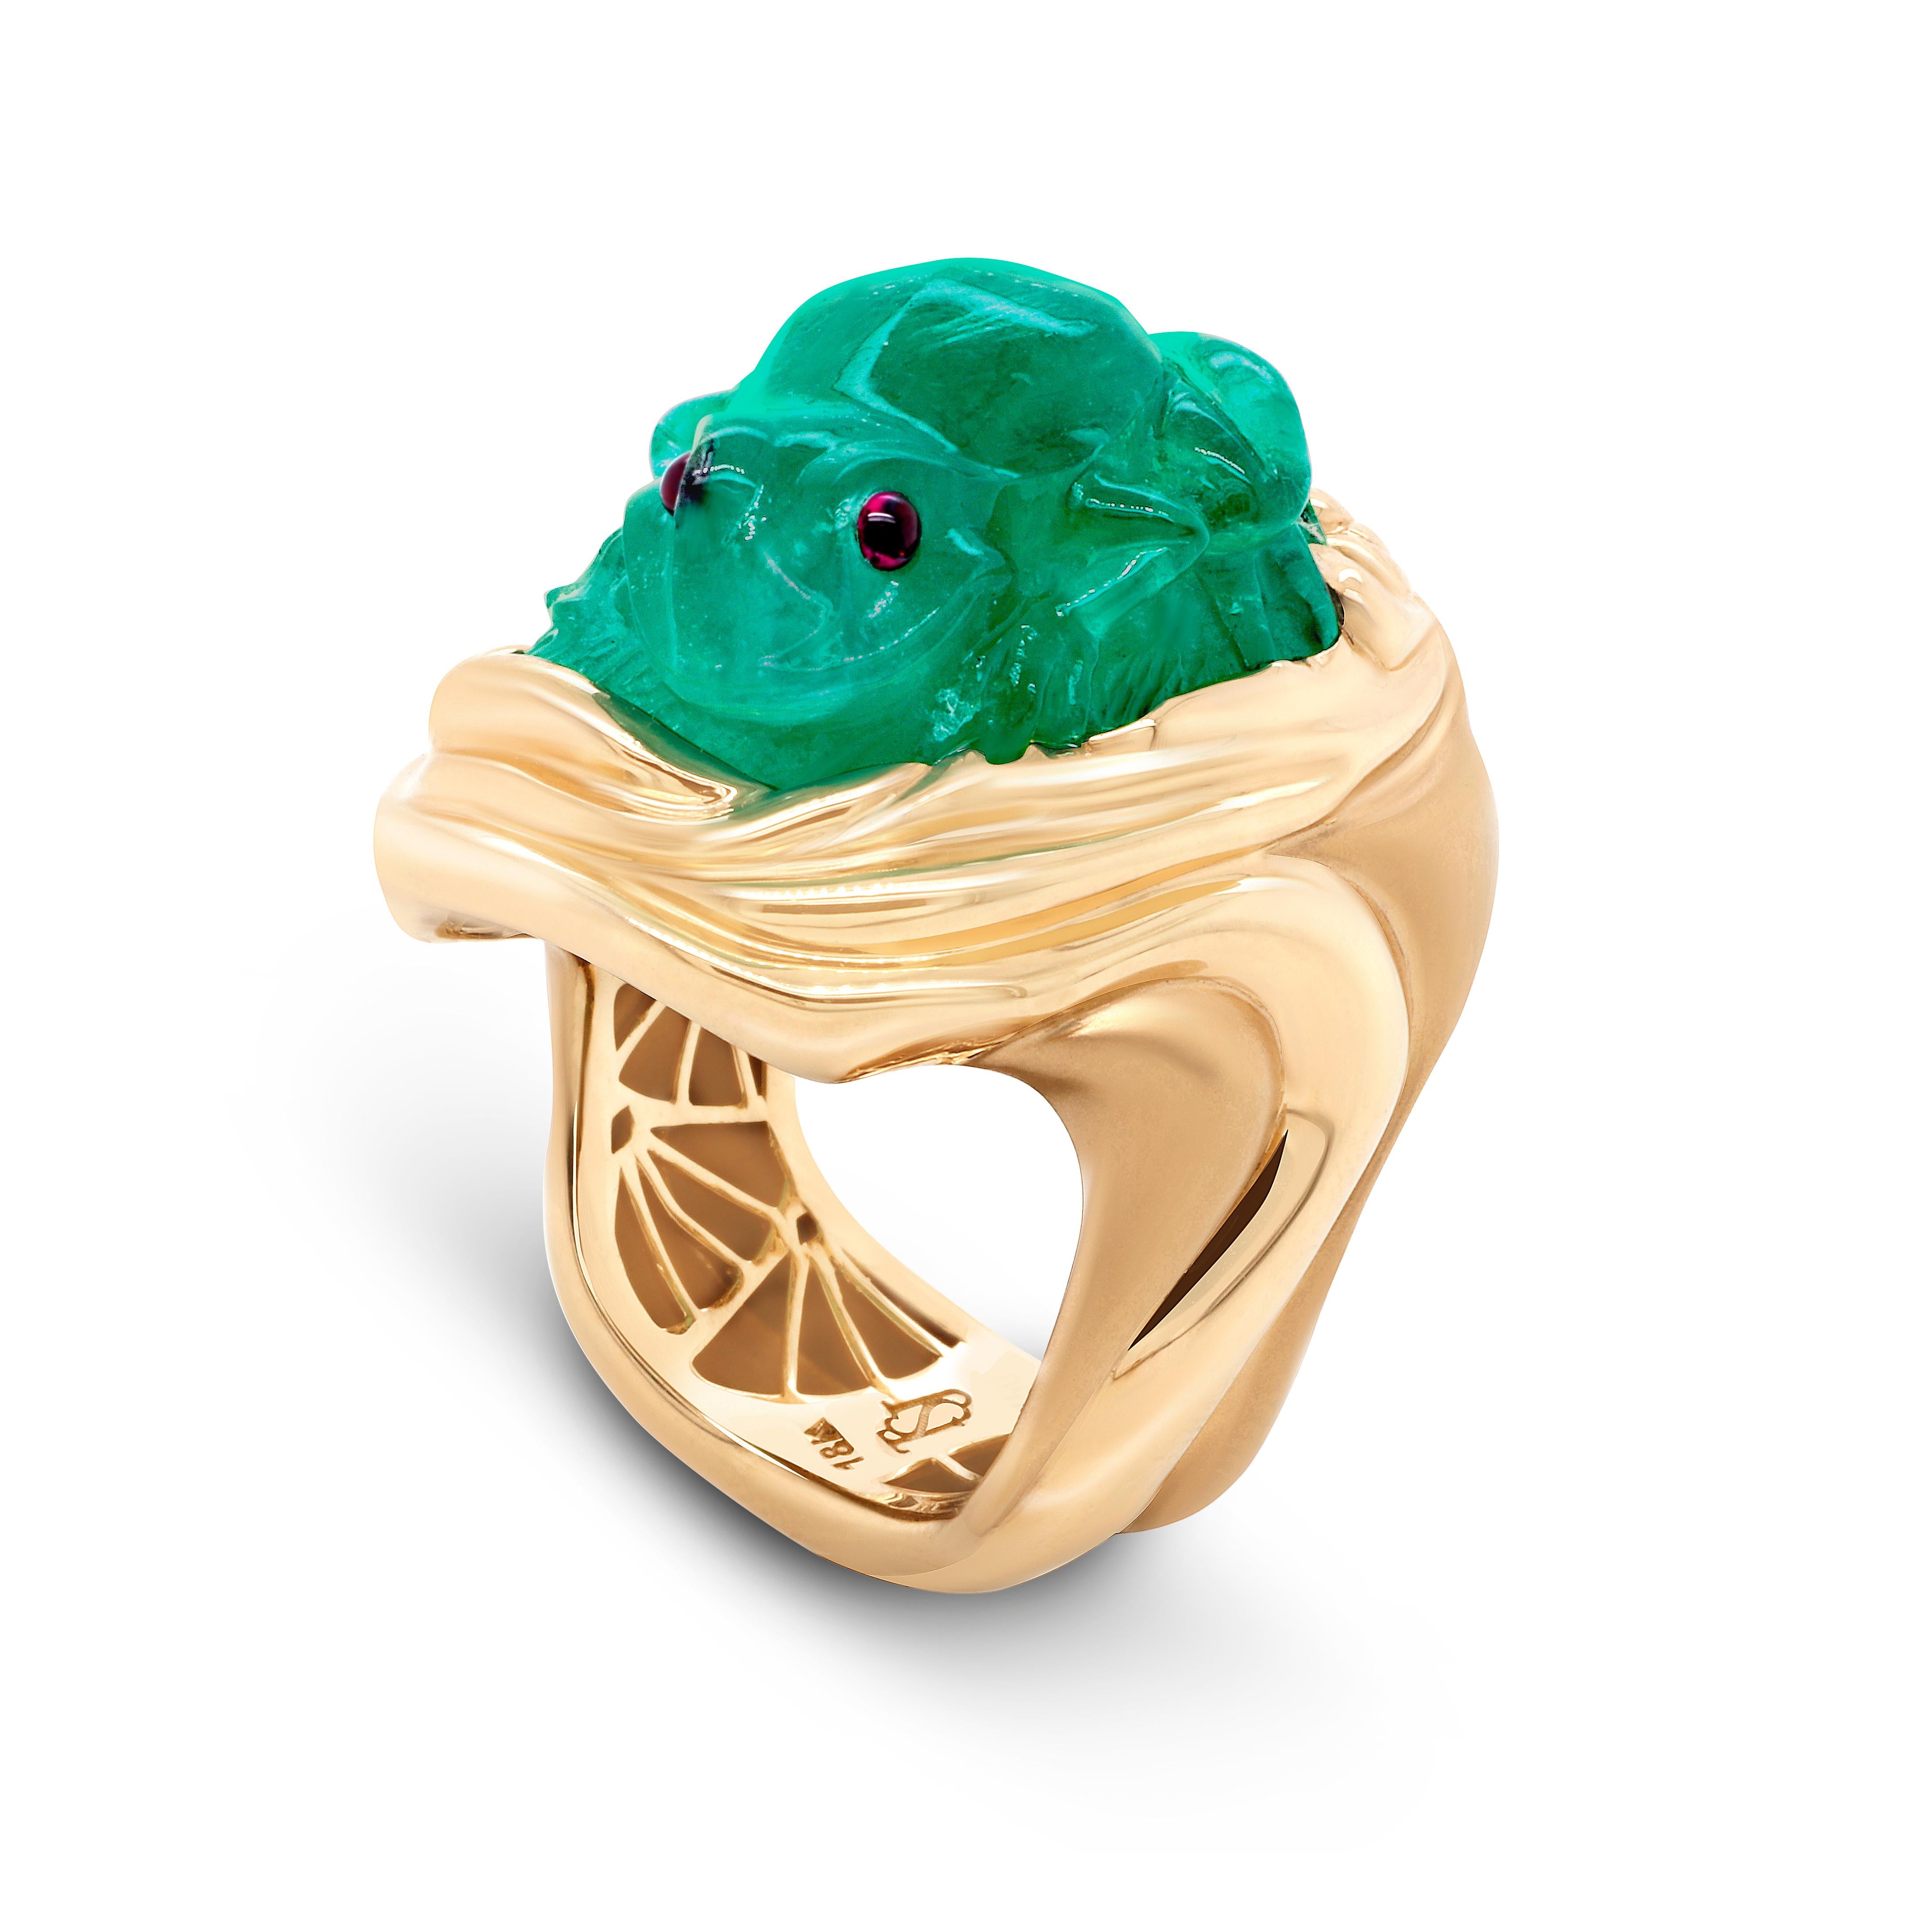 This is an intricate 18 KT Yellow Gold Ring adorned with 16.67 ct Russian Emerald. It's a real masterpiece in Tsarina Jewels' collection inspired by nature! 

Center stone:       Russian Emerald
Weight:                  16.67 ct 
Color:             